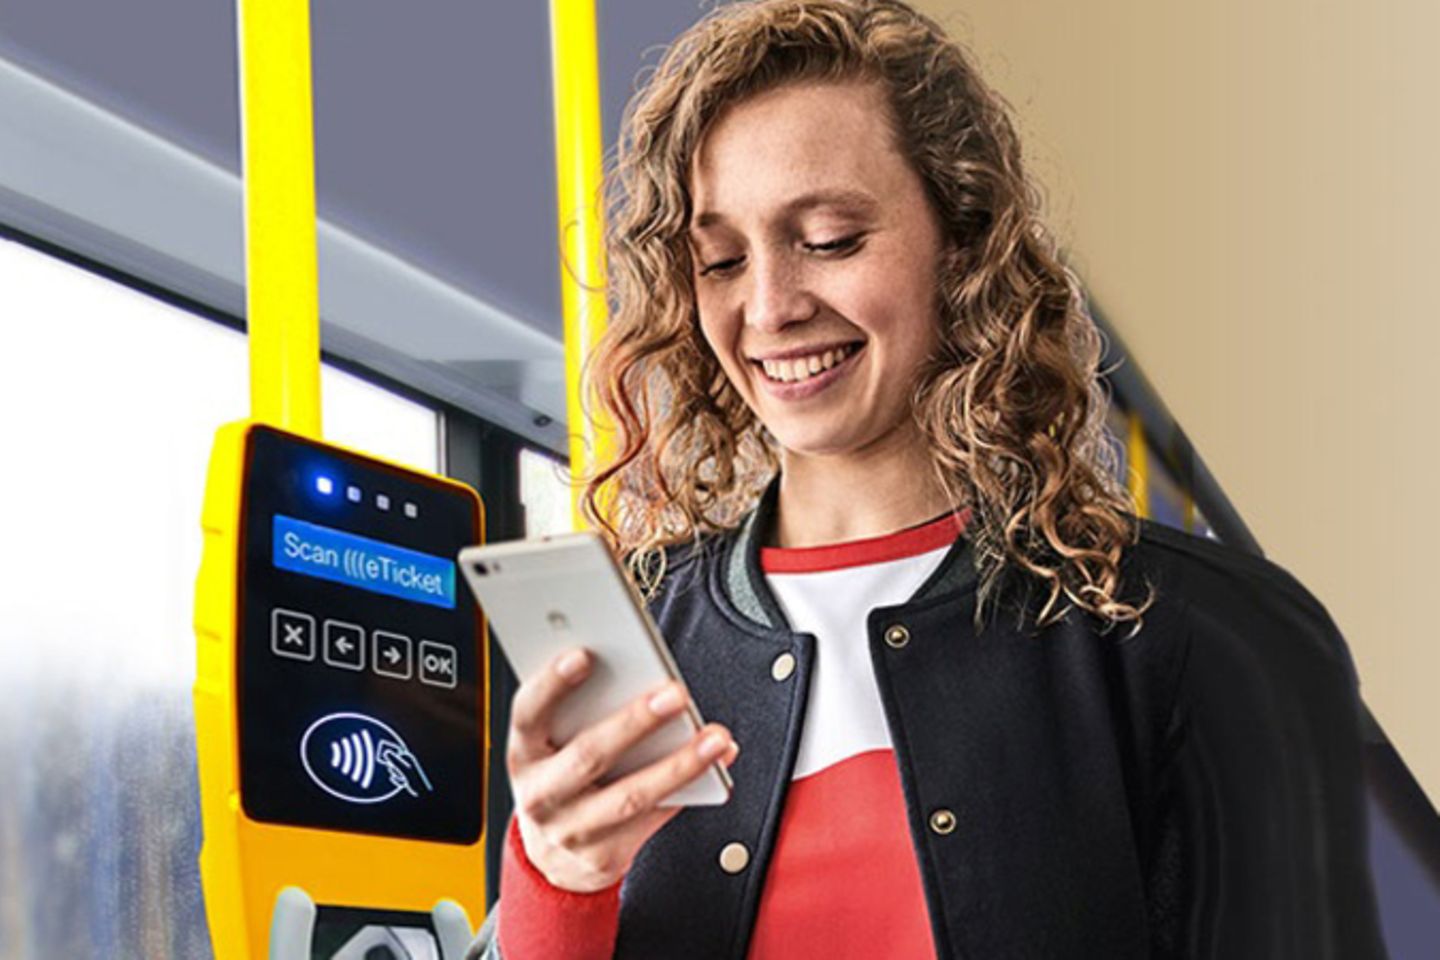 A woman is standing on a bus next to a contactless ticket machine, looking at her smartphone.